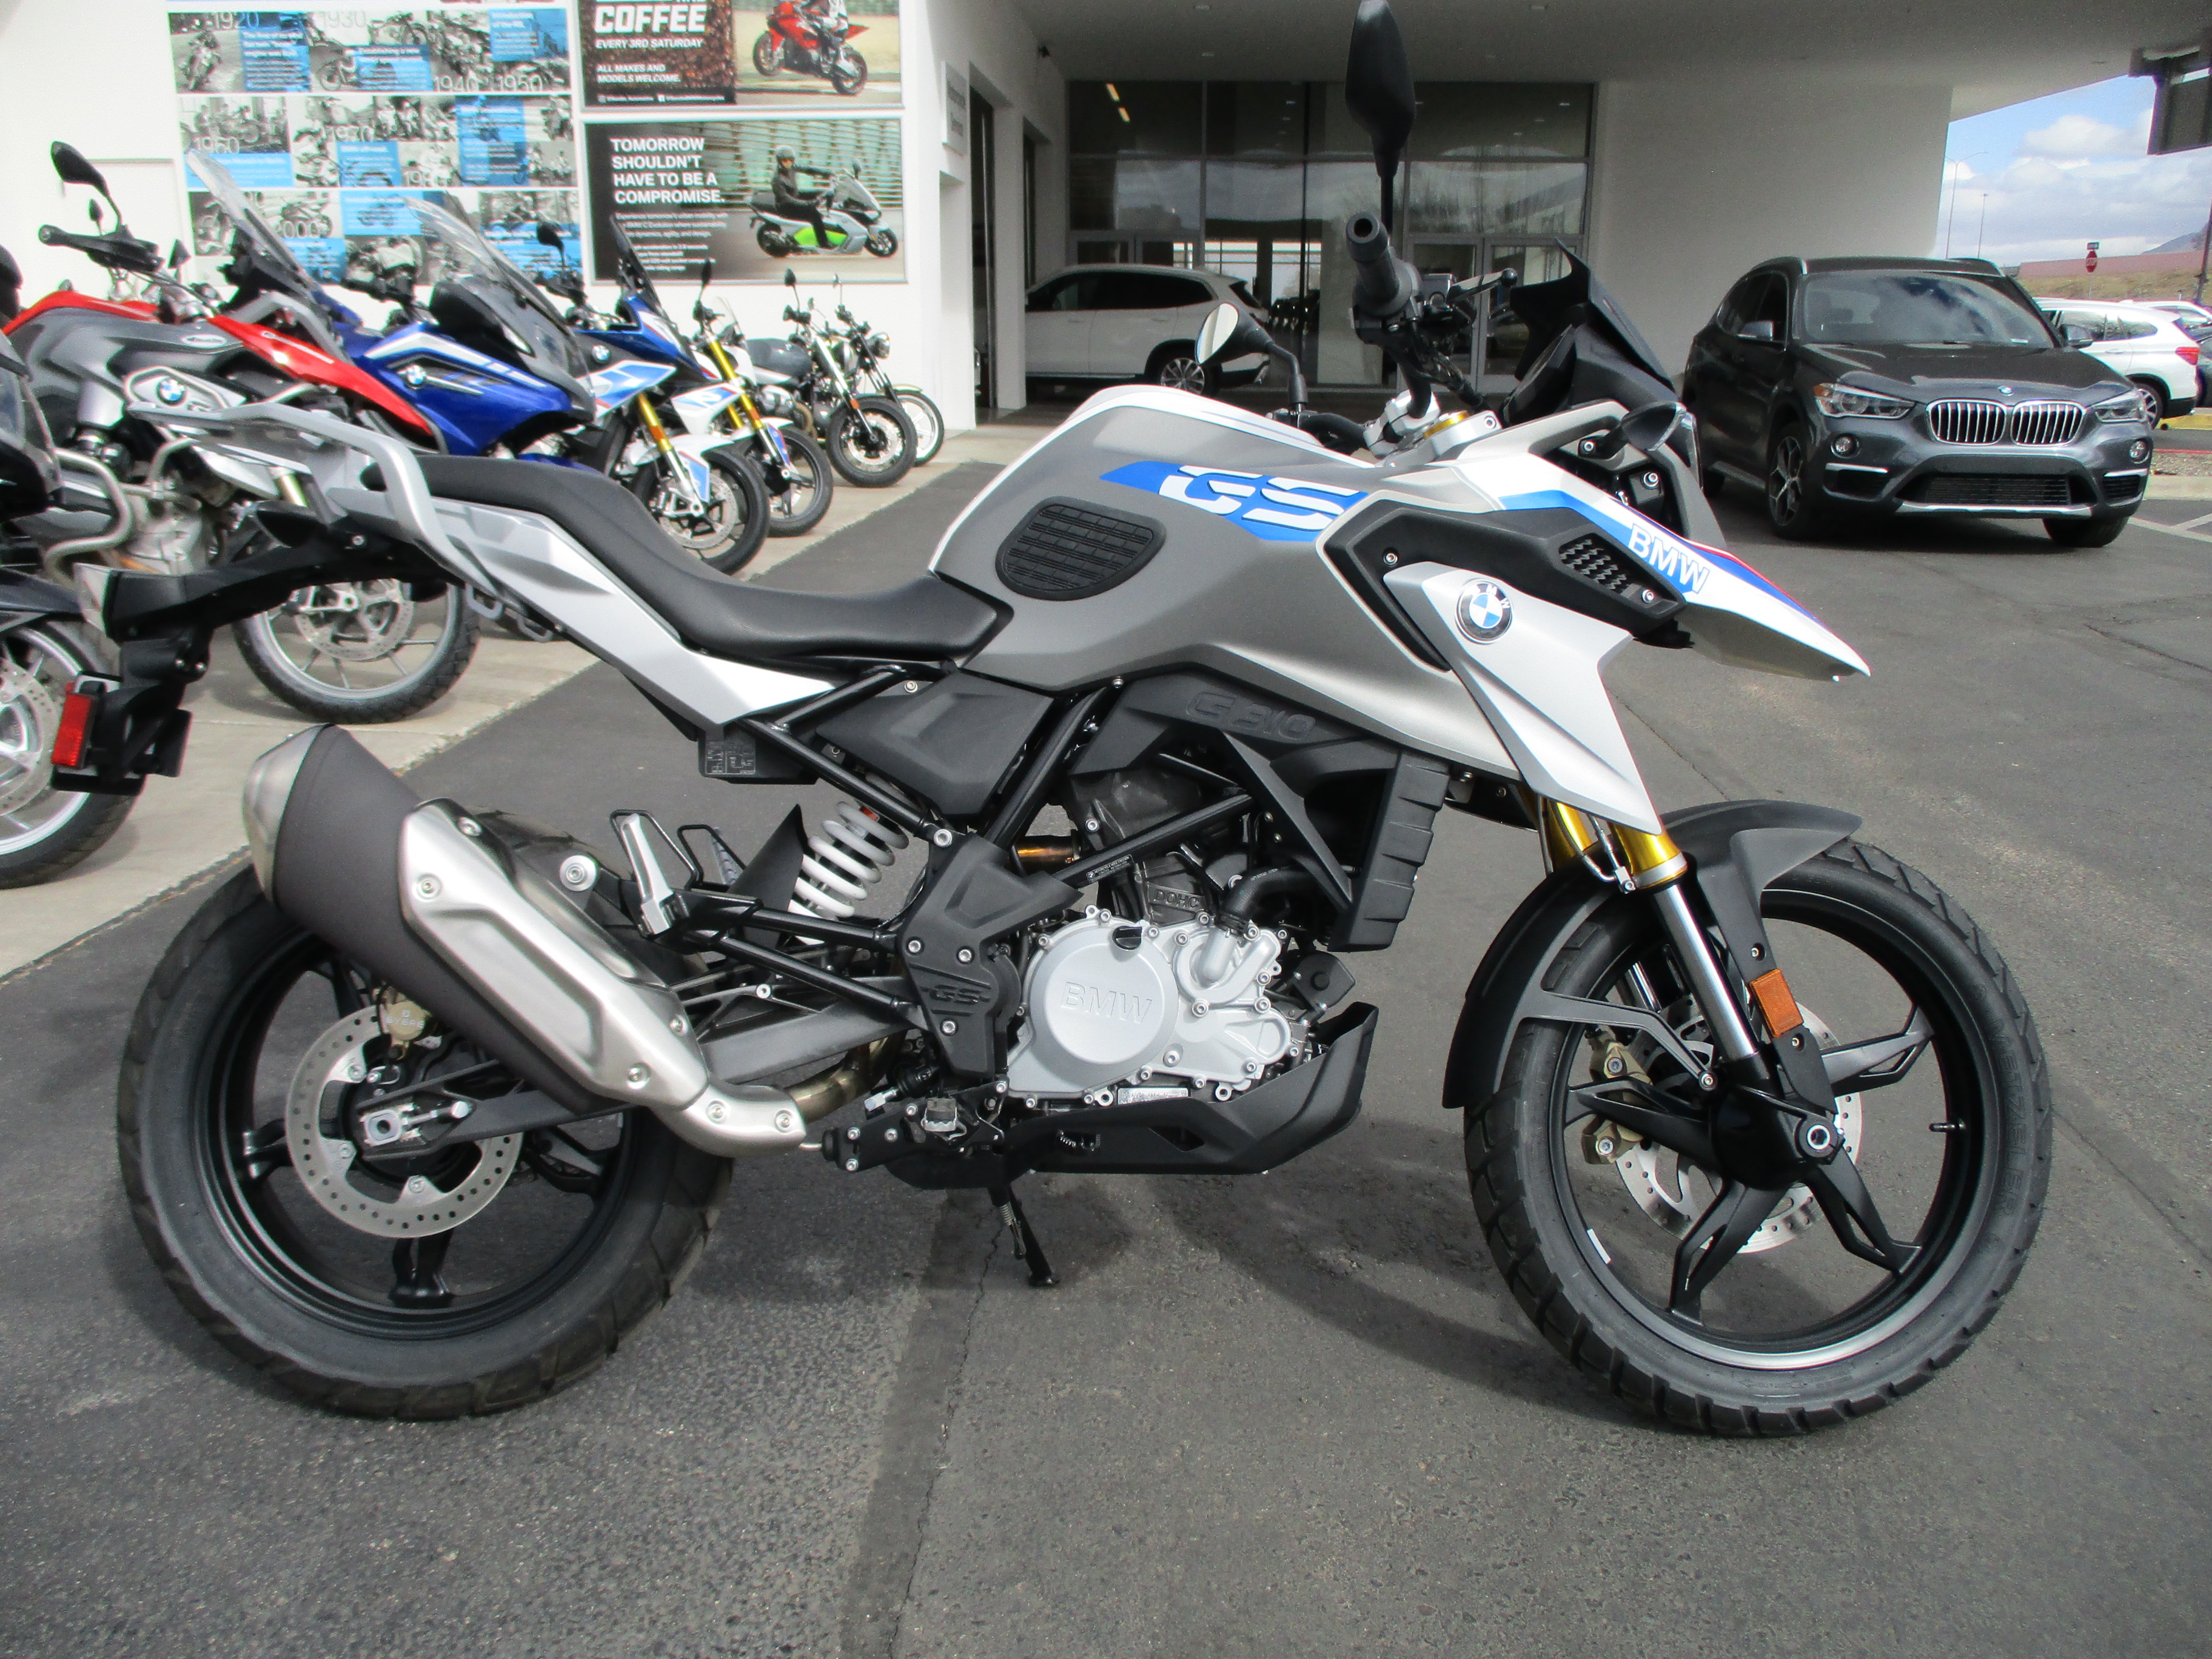 Pre-Owned Motorcycle Inventory - G310GS - Santa Fe BMW Motorcycles